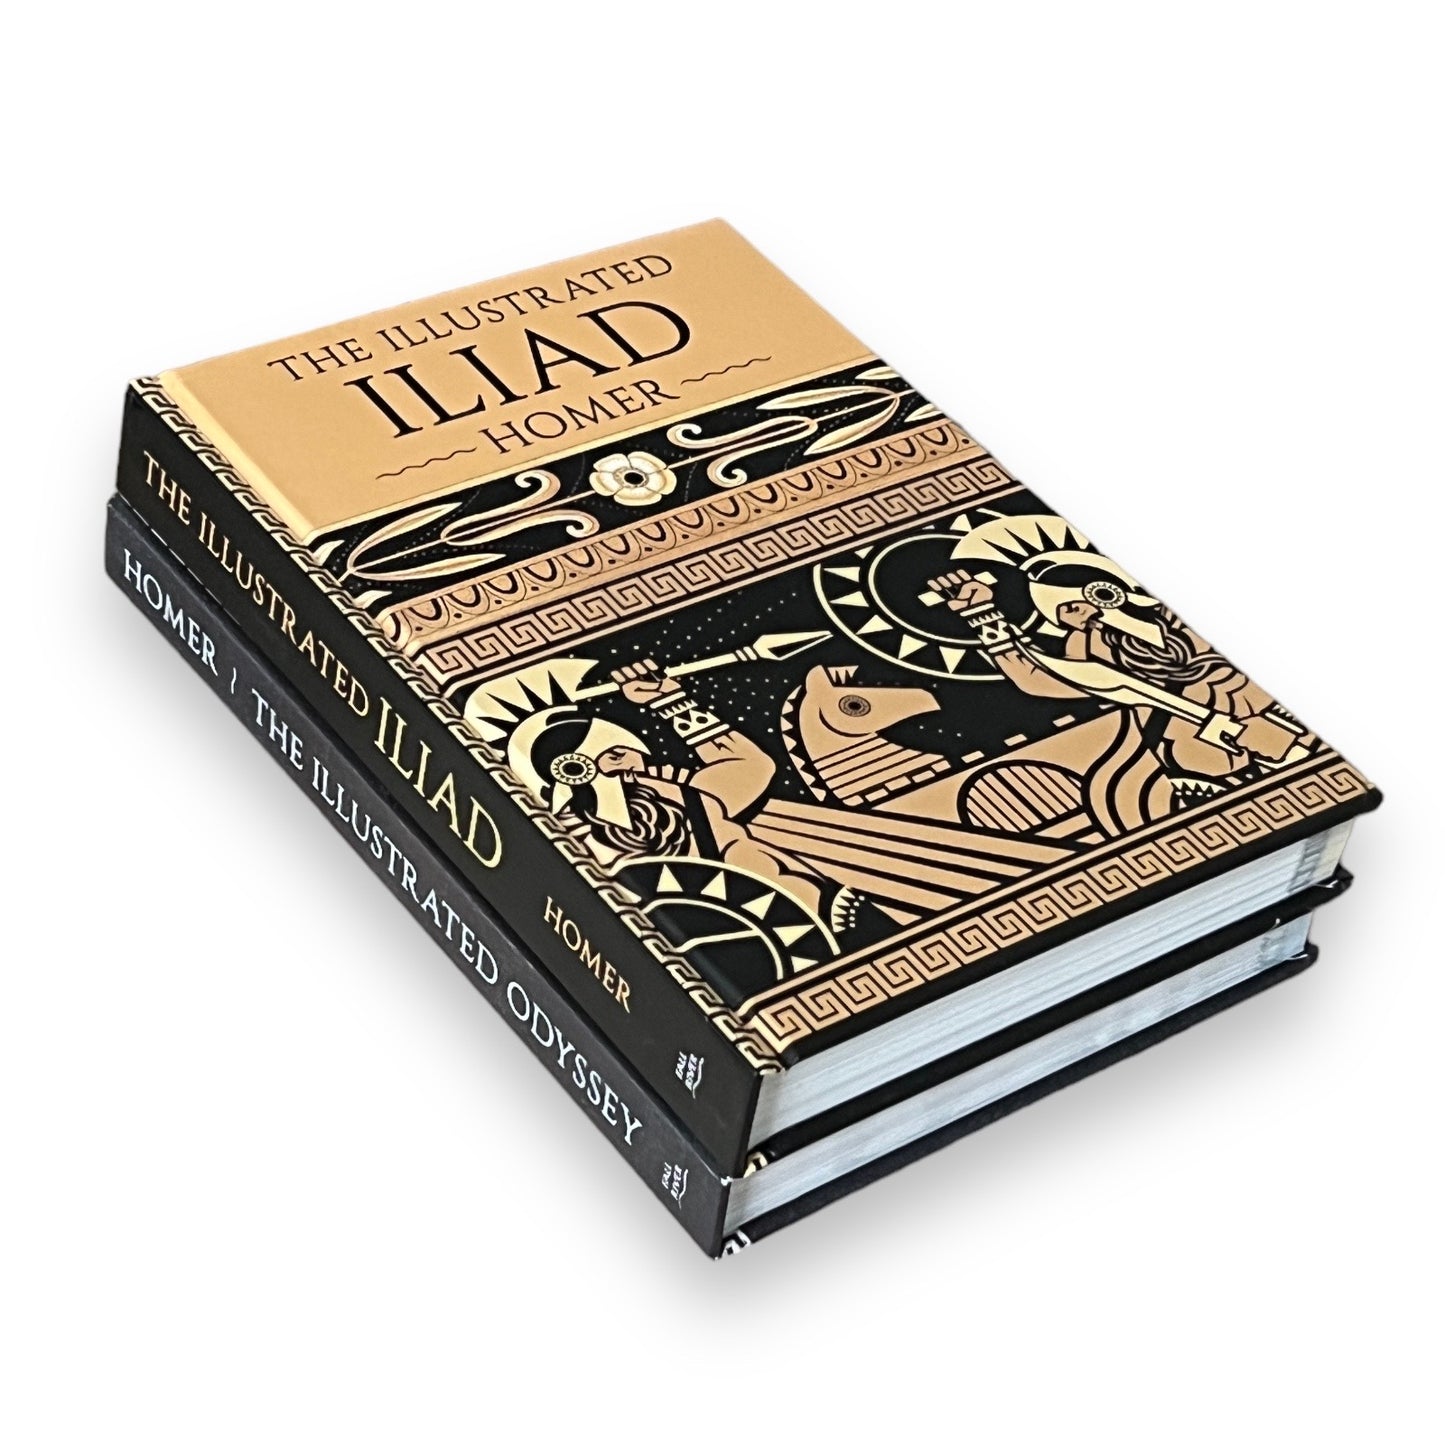 2 Books: The Illustrated ILIAD & ODYSSEY by HOMER - Collectible Deluxe Special Gift Edition - Hardcover - Classics Rare Find